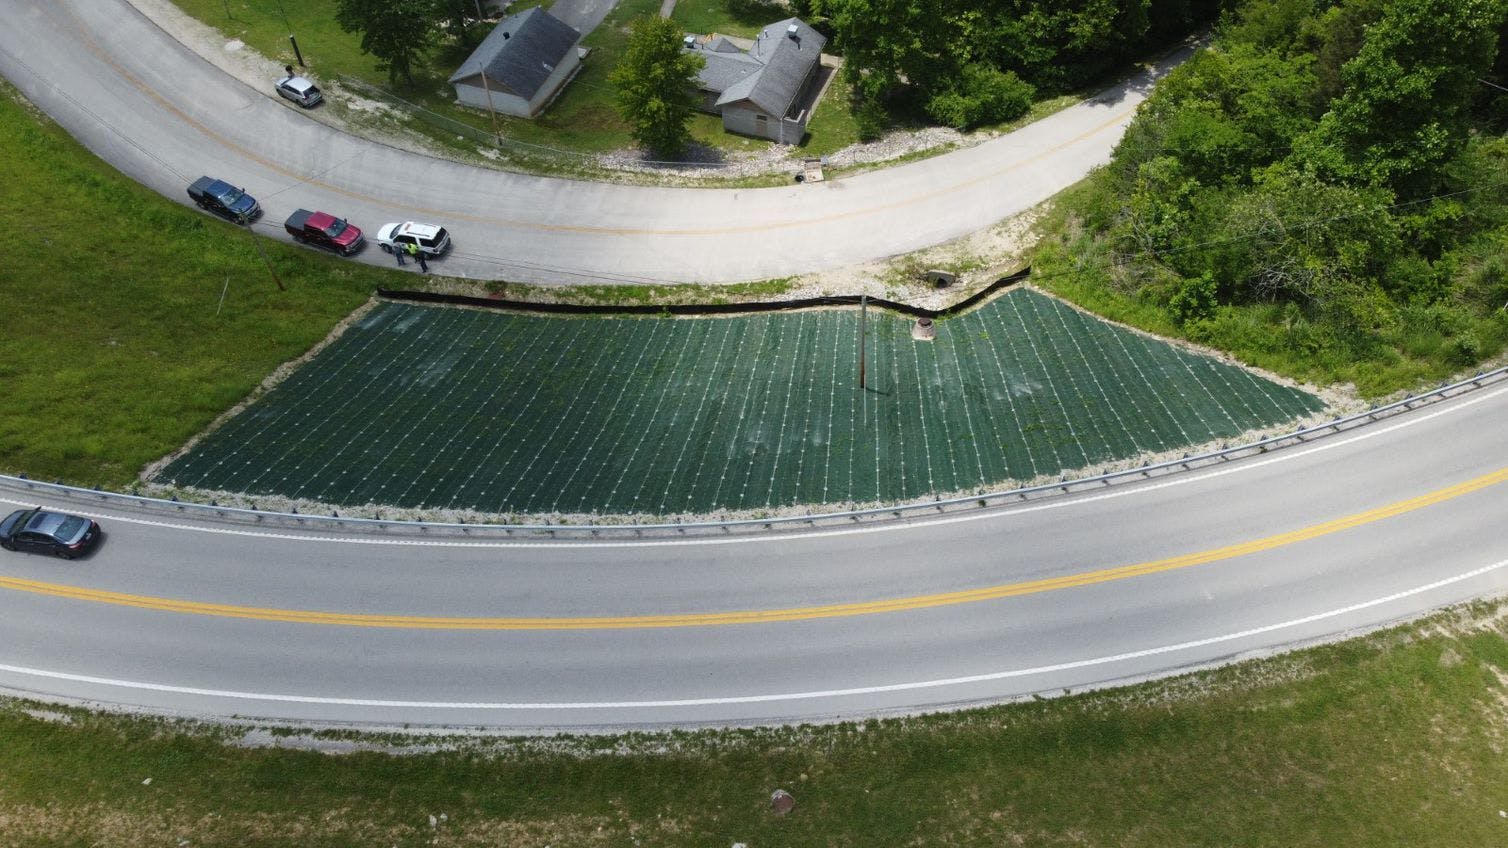 The PROPEX Armormax system helped KYTC meet their goal of providing a safe, efficient, environmentally sound and fiscally responsible option to repair the slope while also ensuring access to the state park and economic growth in the surrounding area.